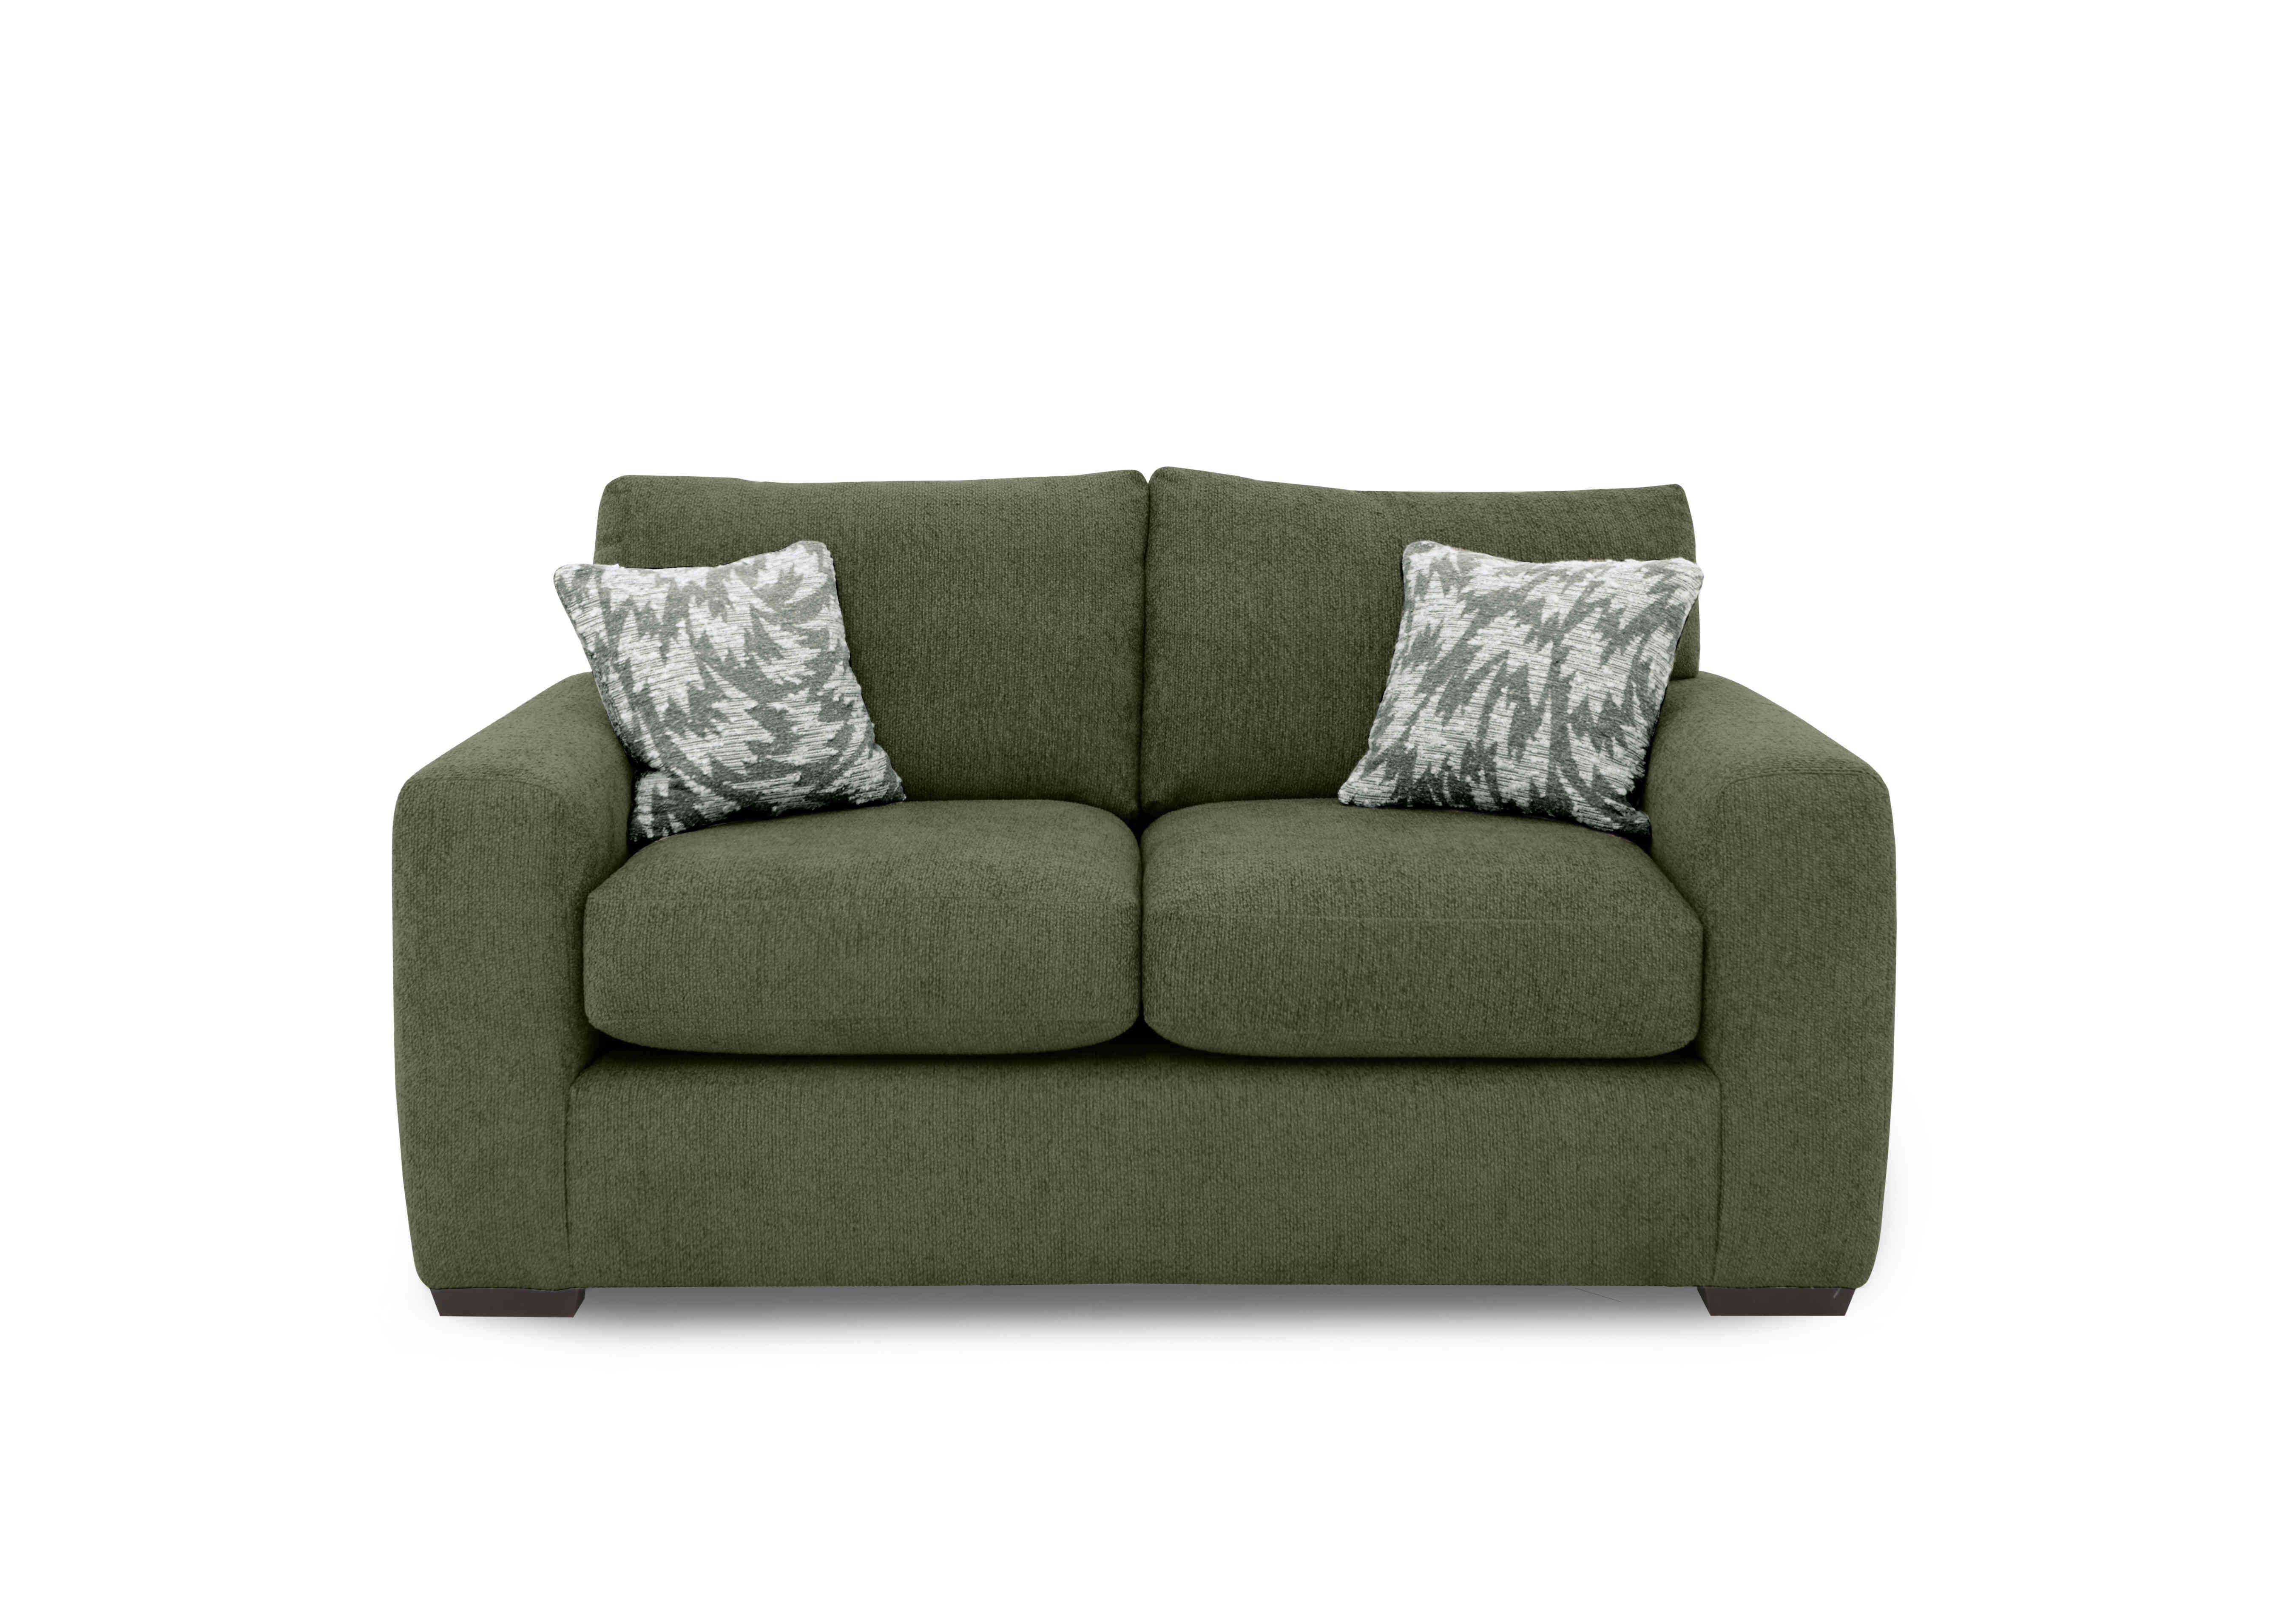 Harper 2 Seater Classic Back Sofa Bed in Leo Forest on Furniture Village